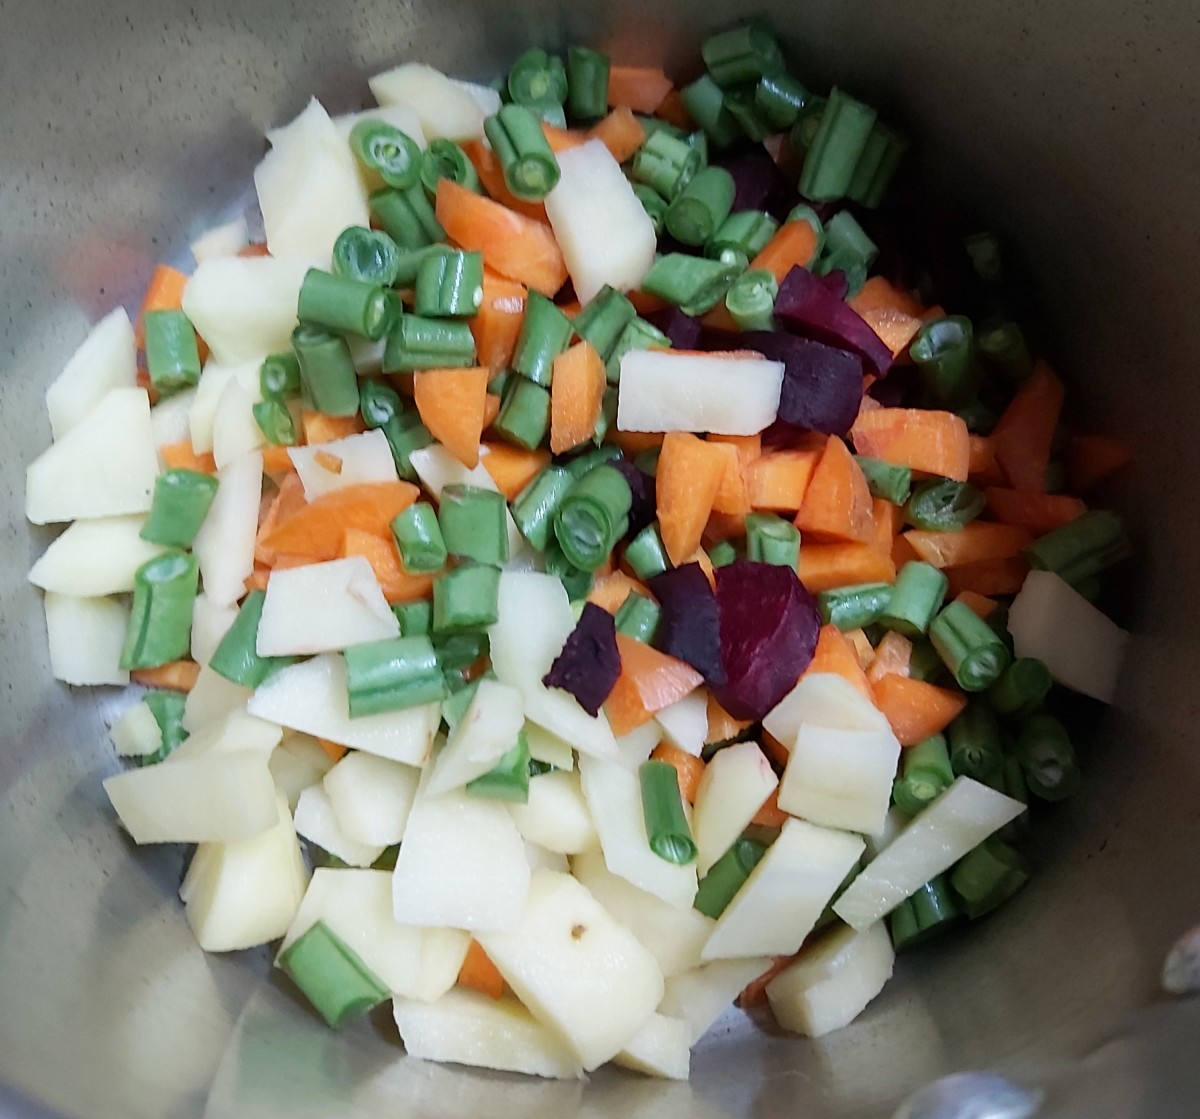 Add carrots, beans, potatoes, beetroot to a pressure cooker (if you are using fresh or dry peas add that too. No need to add frozen peas as it can be easily cooked). 